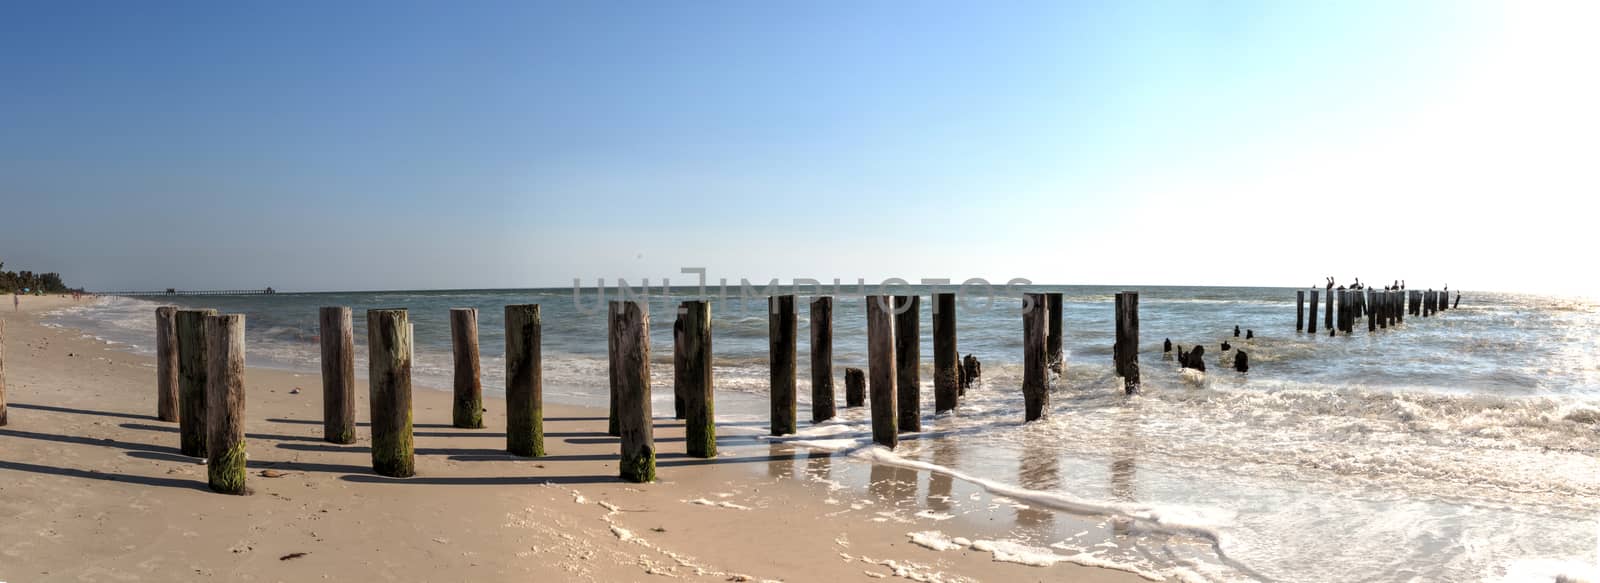 Clear blue sky over the old dilapidated pier on the beach by steffstarr